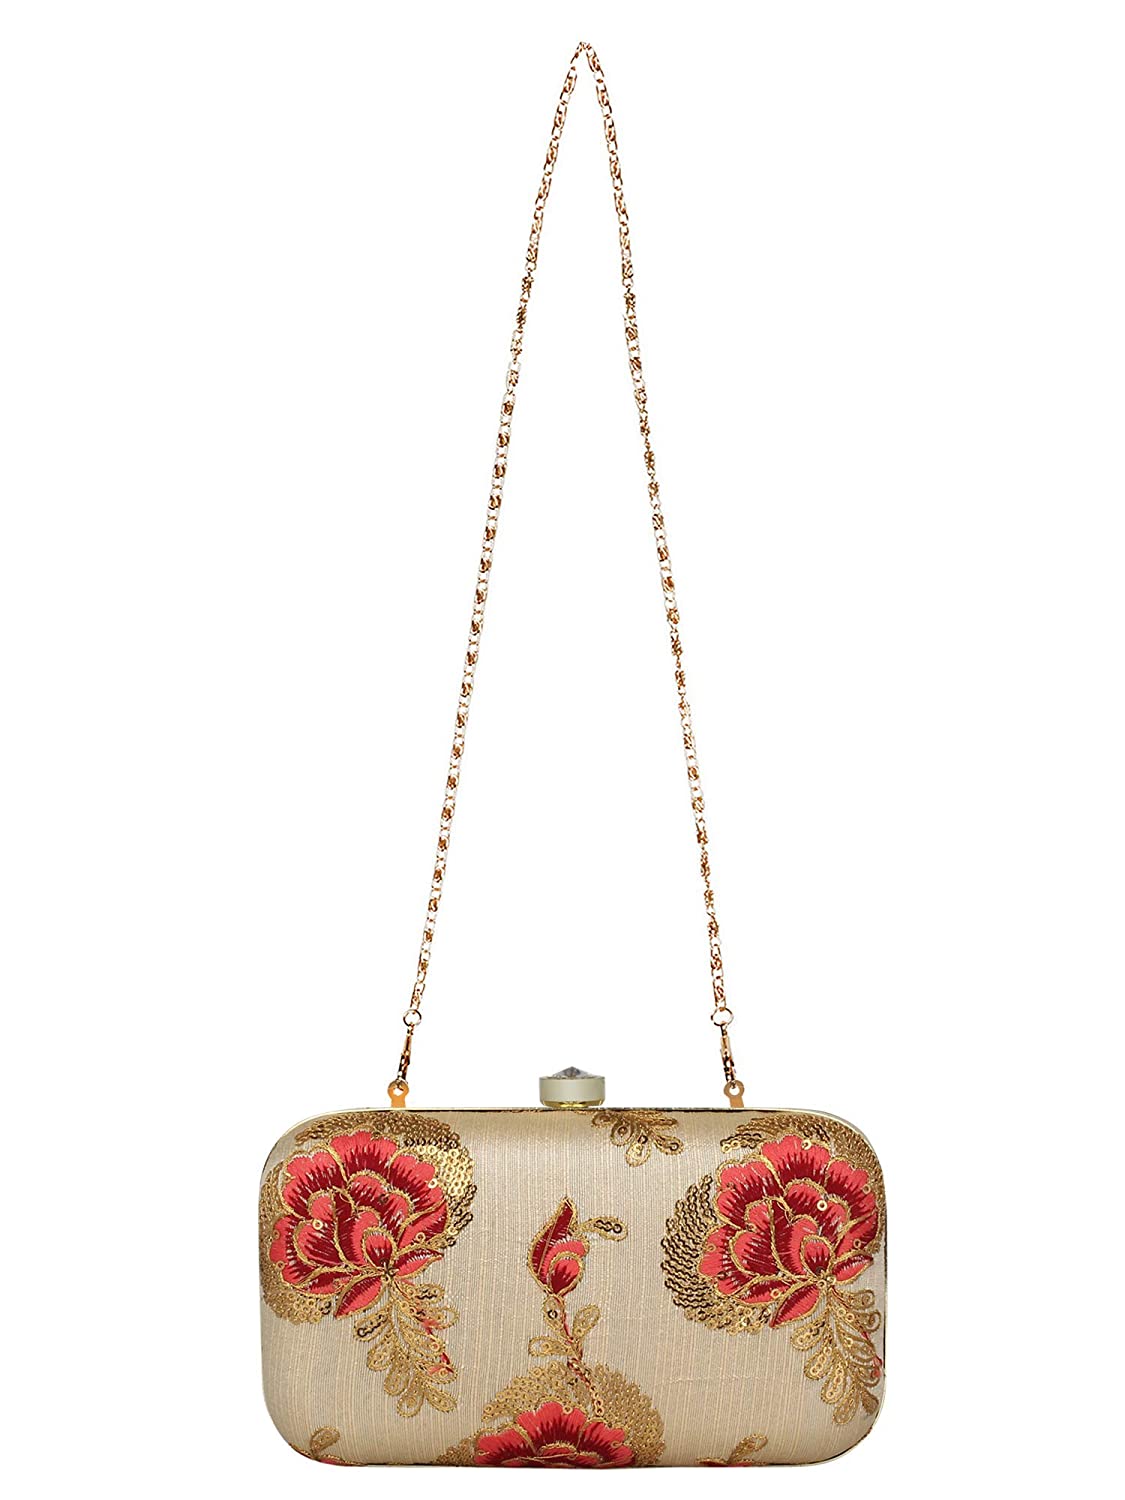 Women's Beige Color tulle Embroidered Faux Silk Clutch - VASTANS